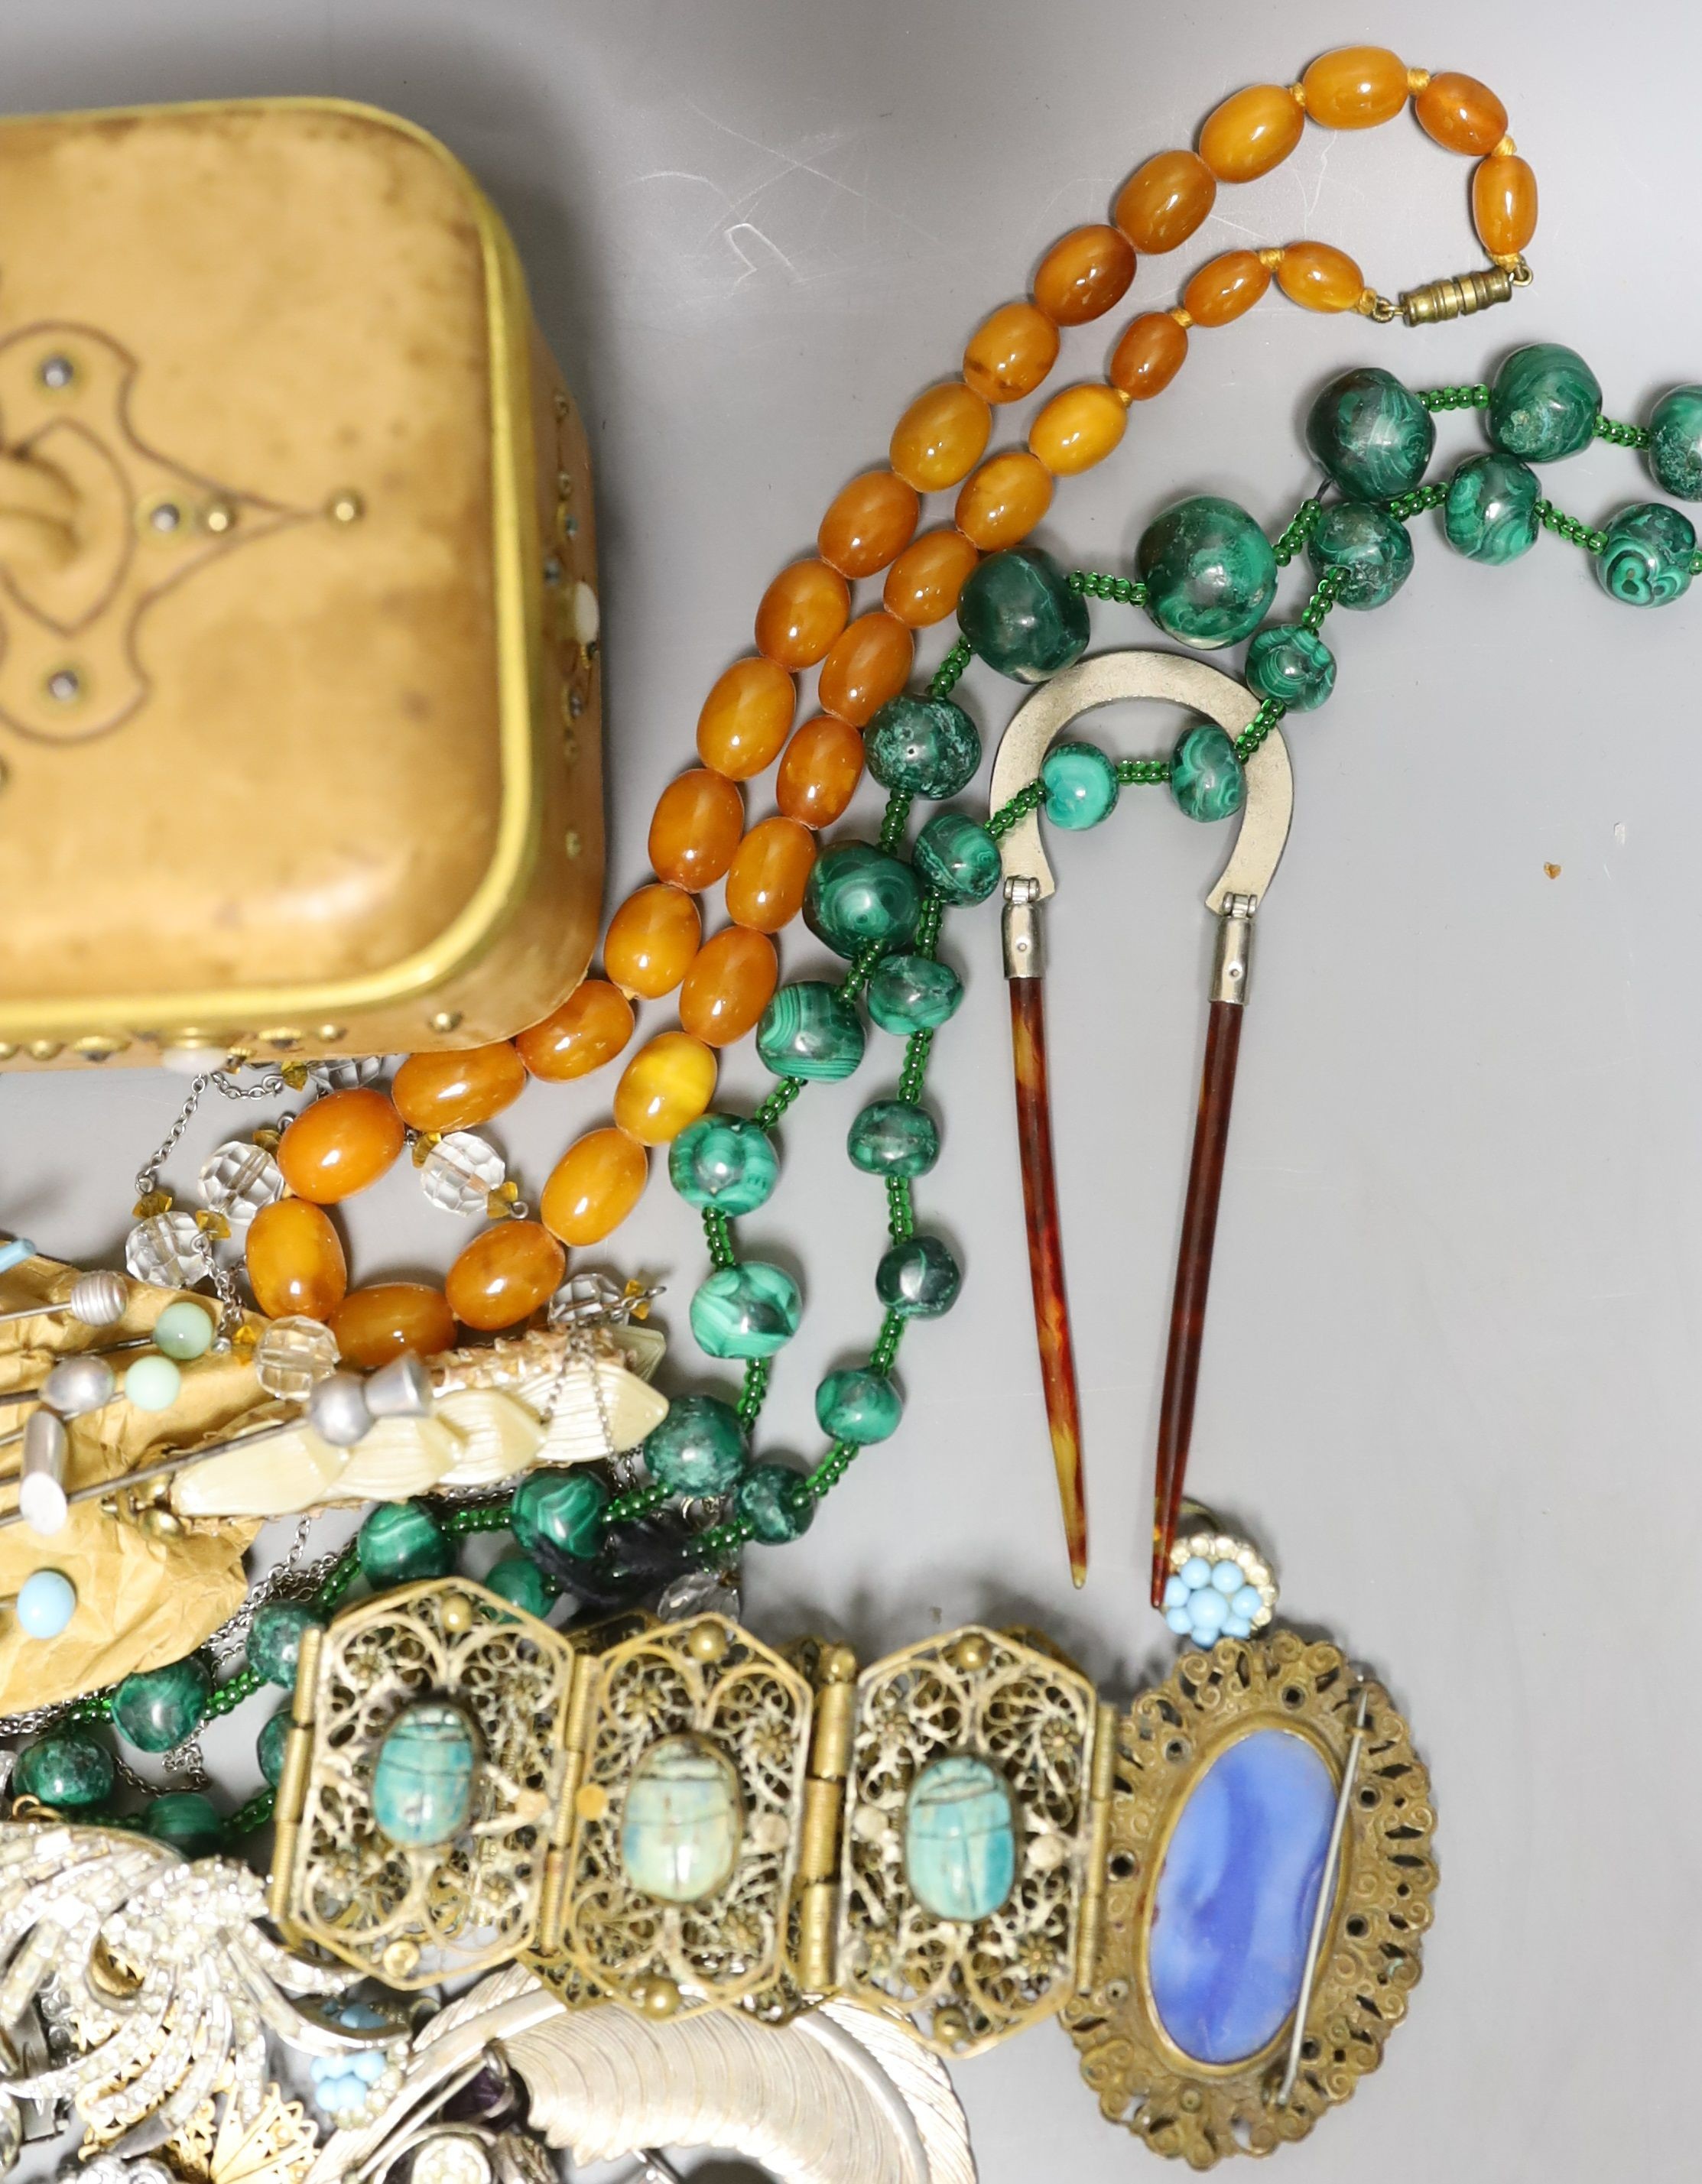 A 19th century calf skin and cut steel mounted trinket box and assorted costume jewellery, including a malachite necklace.